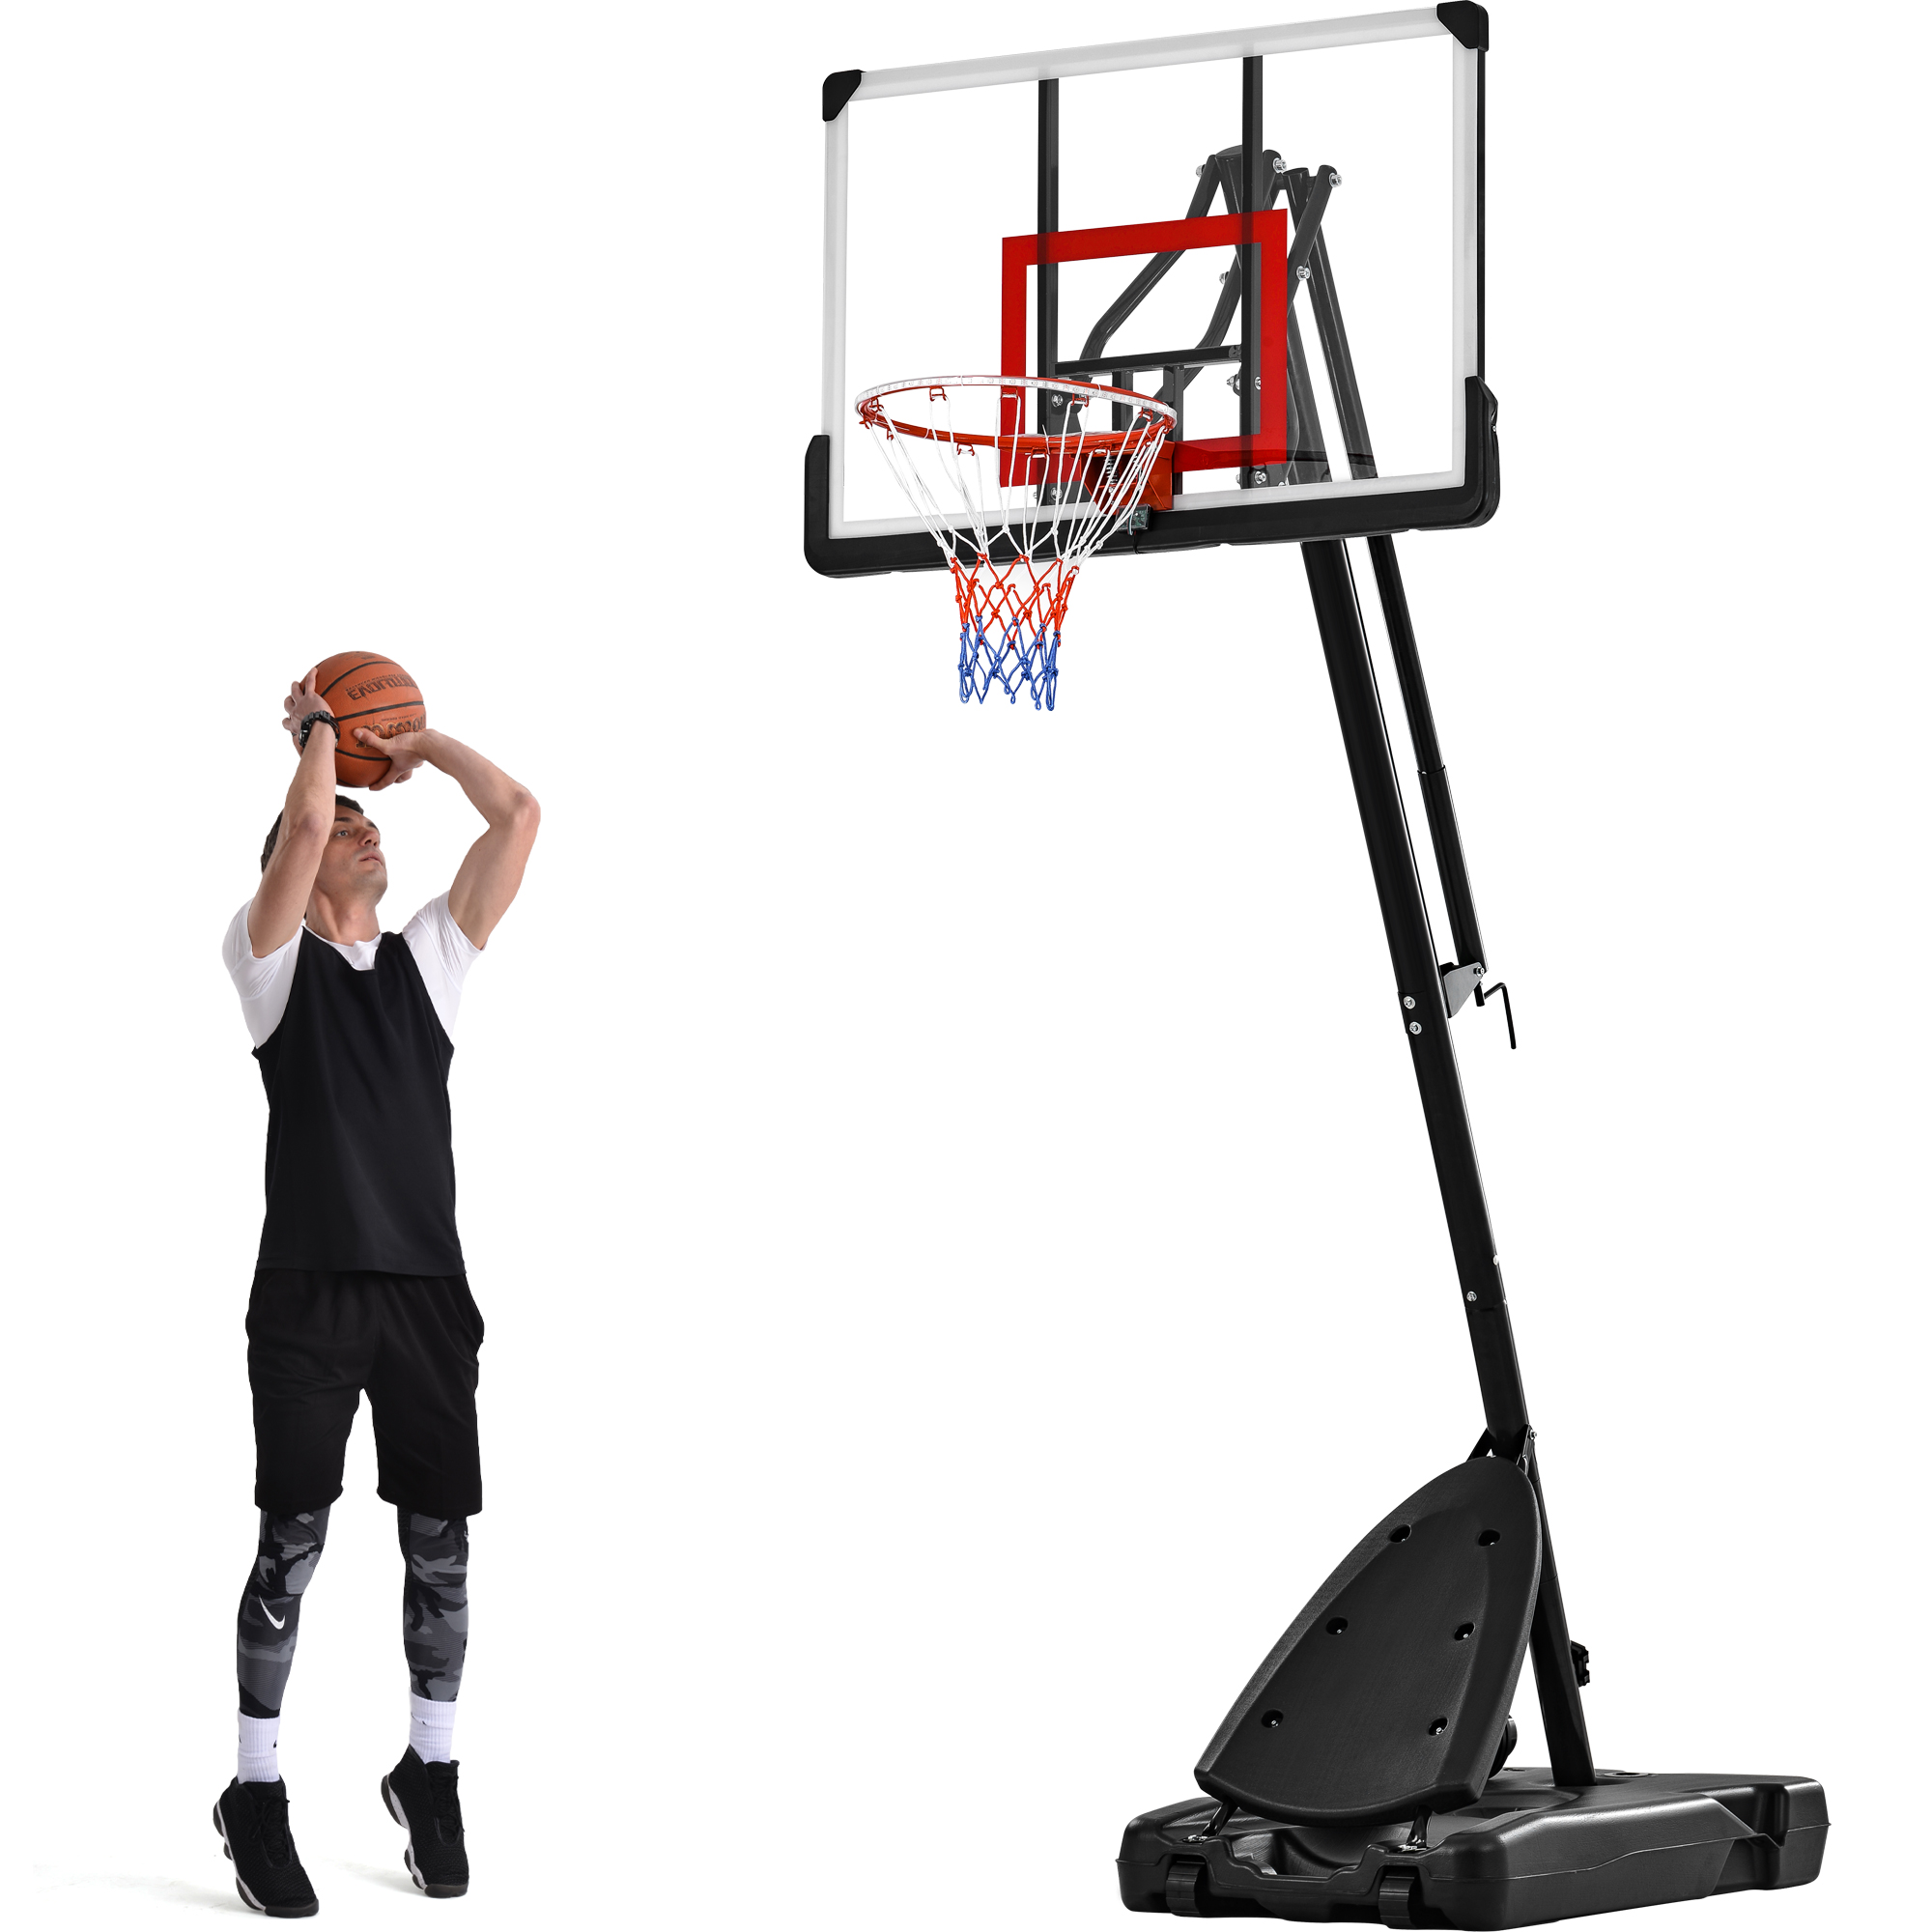 Basketball Hoop Basketball System 7.5ft-10ft Height Adjustable  Basketball System for Indoor Outdoor Use LED Basketball Hoop Lights, Colorful lights, Waterproof,Super Bright to Play at Night Outdoors-Boyel Living